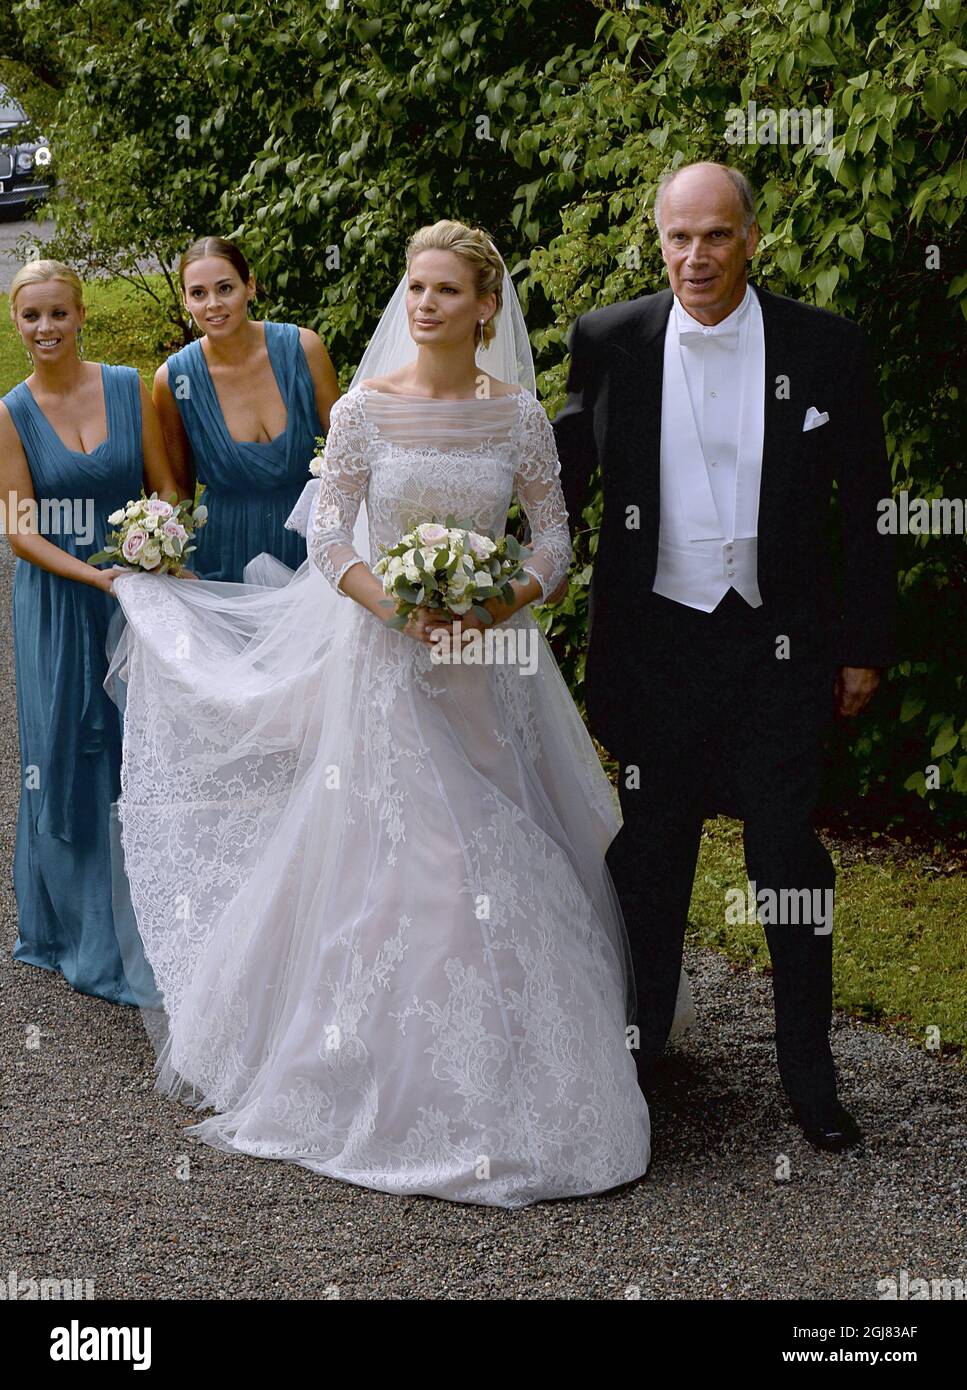 STOCKHOLM 2013-08-31 Bride Vicky AndrÃ©n and her father arrive to the wedding at the Ulriksdal Palace Chapel in Stockholm, Sweden, August 31, 2013. The Swedish Kings godson Gustaf Magnusson (son of Princess Christina and Tord Magnuson) married model Vicky AndrÃ©n Saturday. Photo Jonas Ekstromer / SCANPIX / ** SWEDEN OUT ** Stock Photo